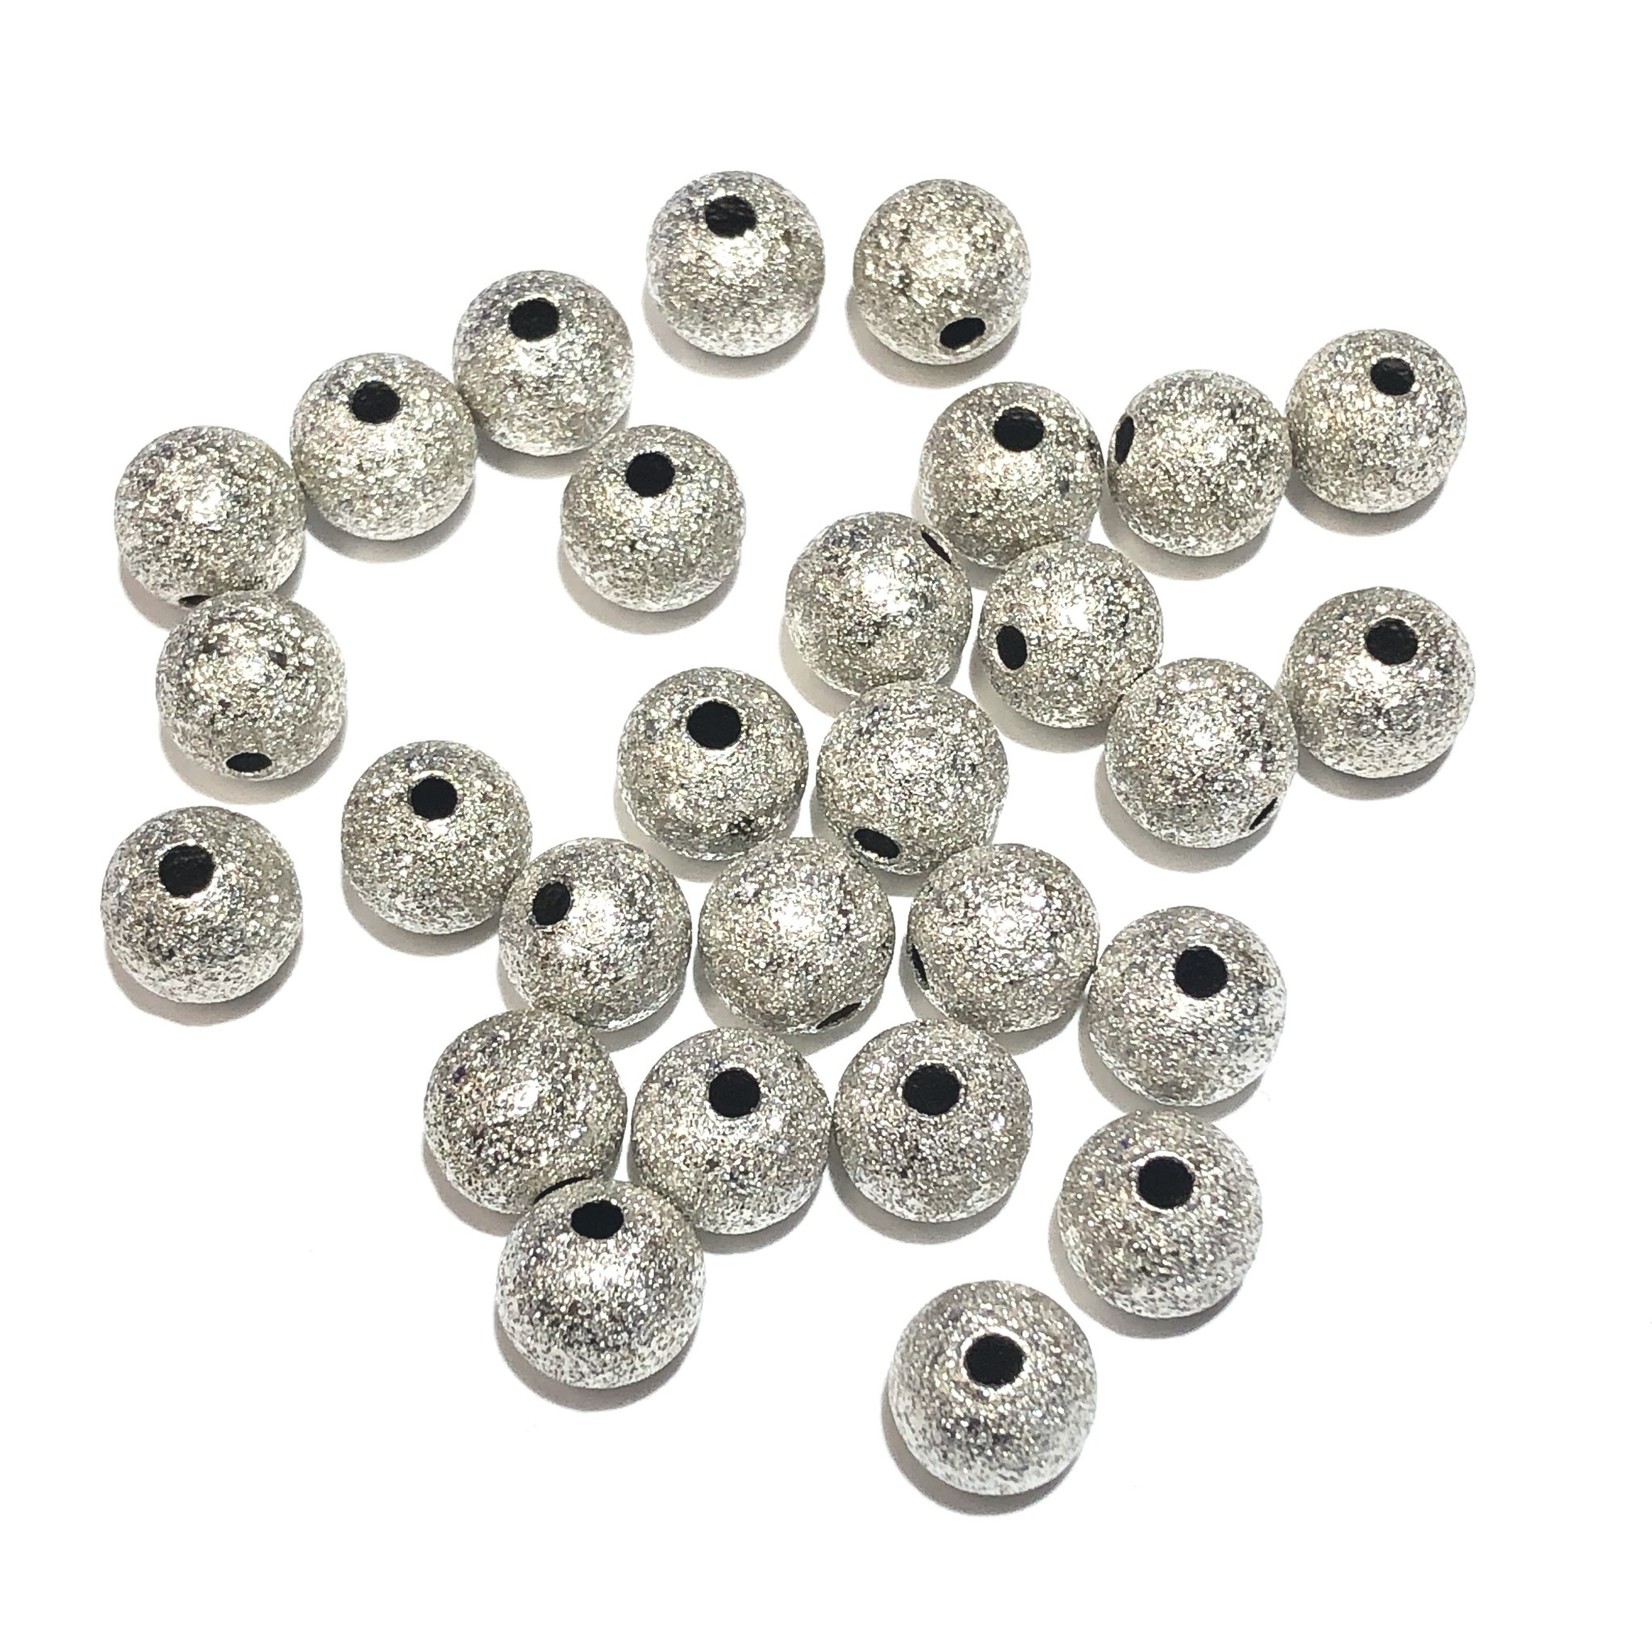 Platinum Plated Stardust 8mm Spacer Bead 50pcs